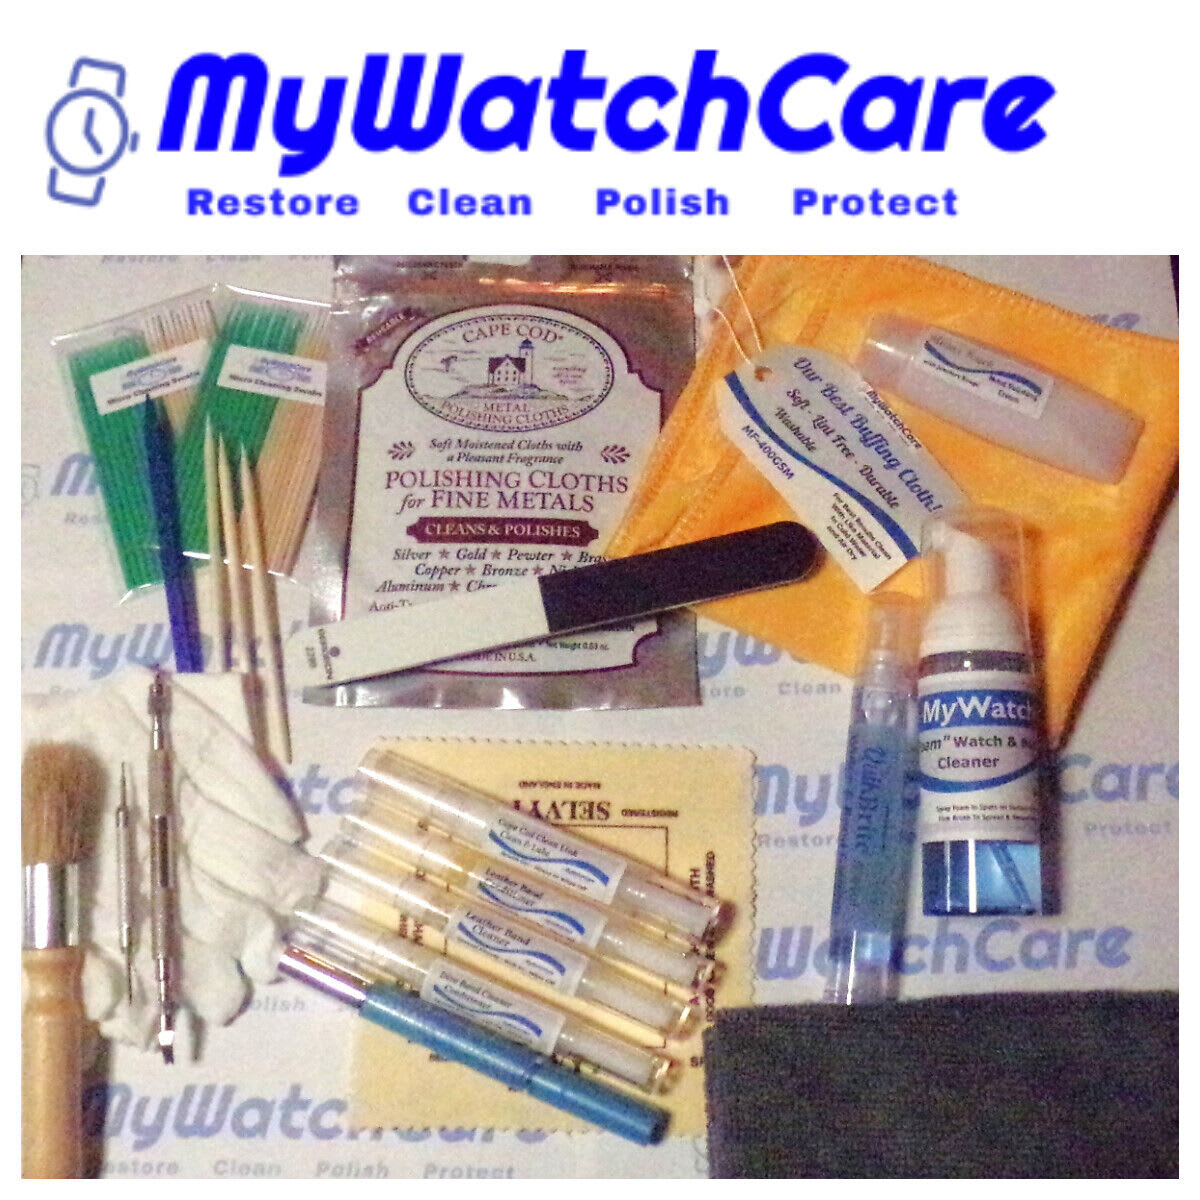 Leather Band Cleaning Kit From The Watch Care Company